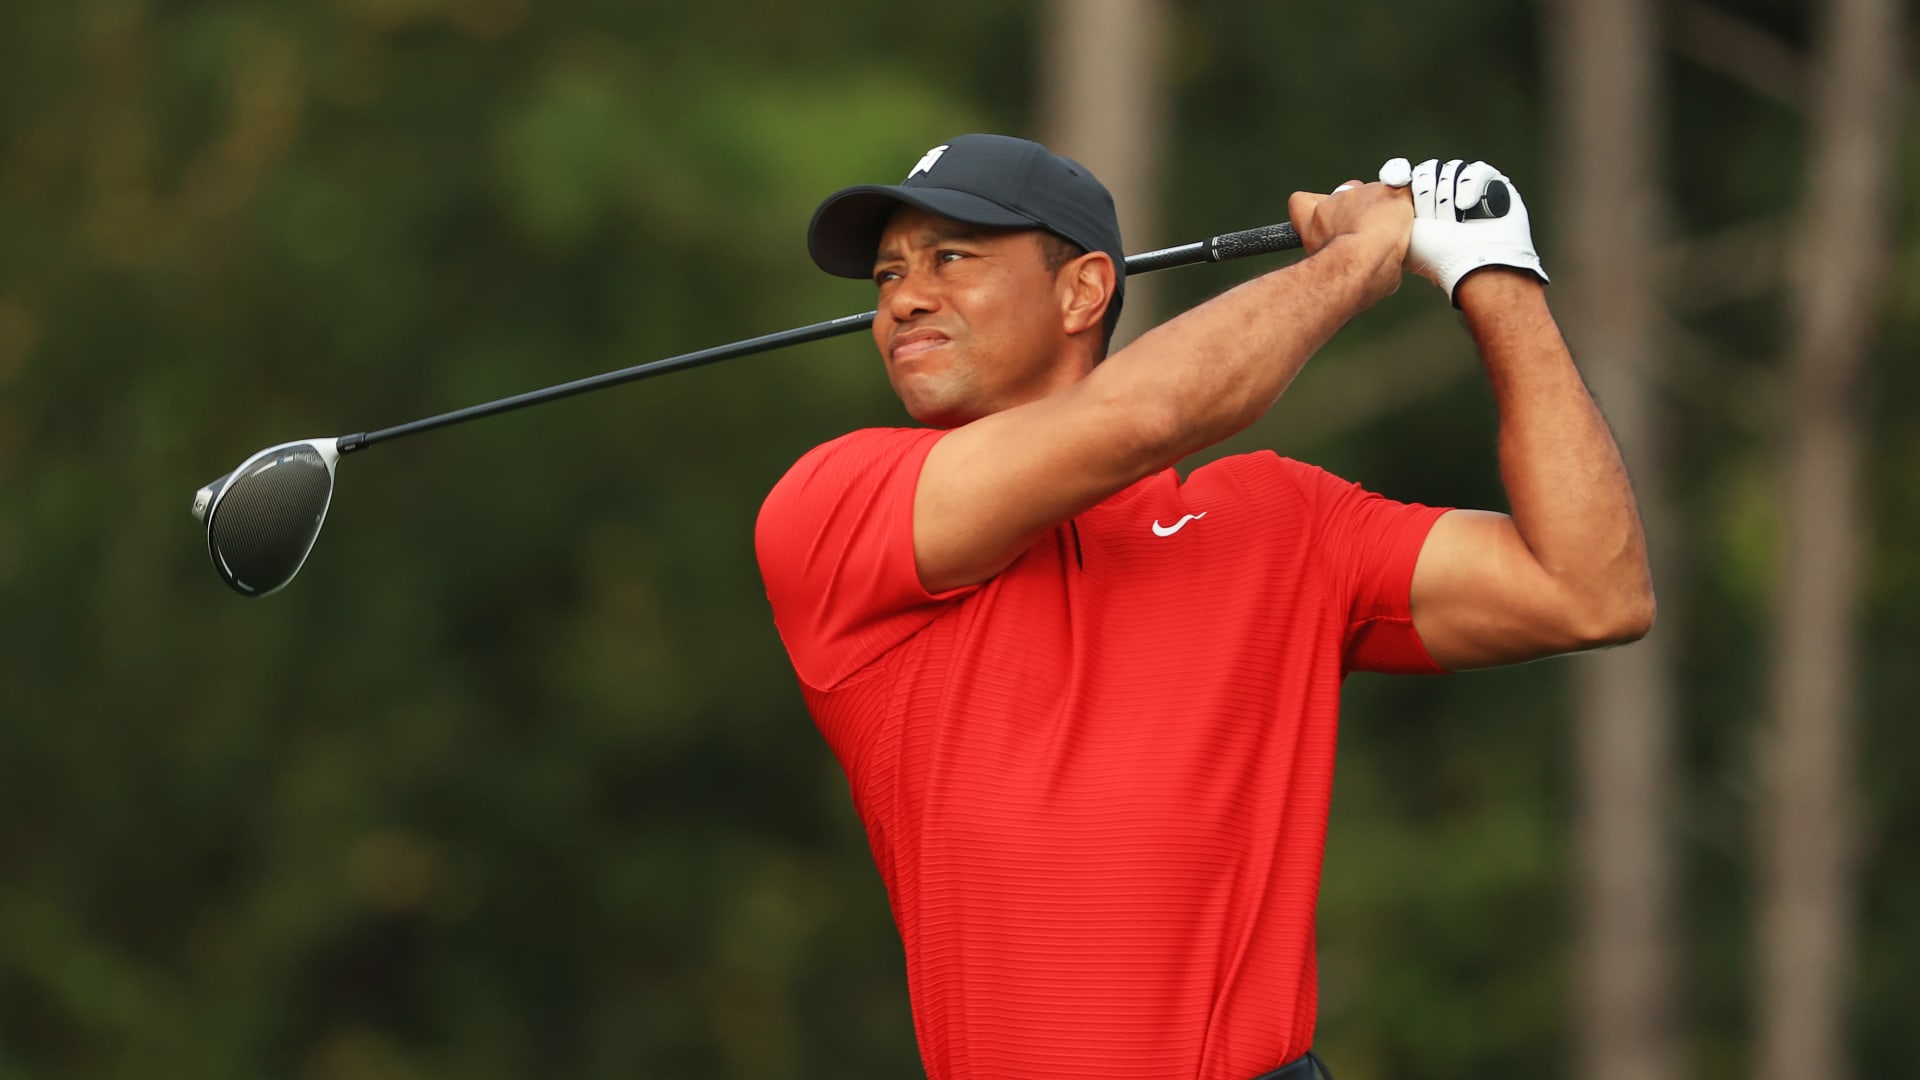 Tiger Woods returns to golf video games for the first time since 2013